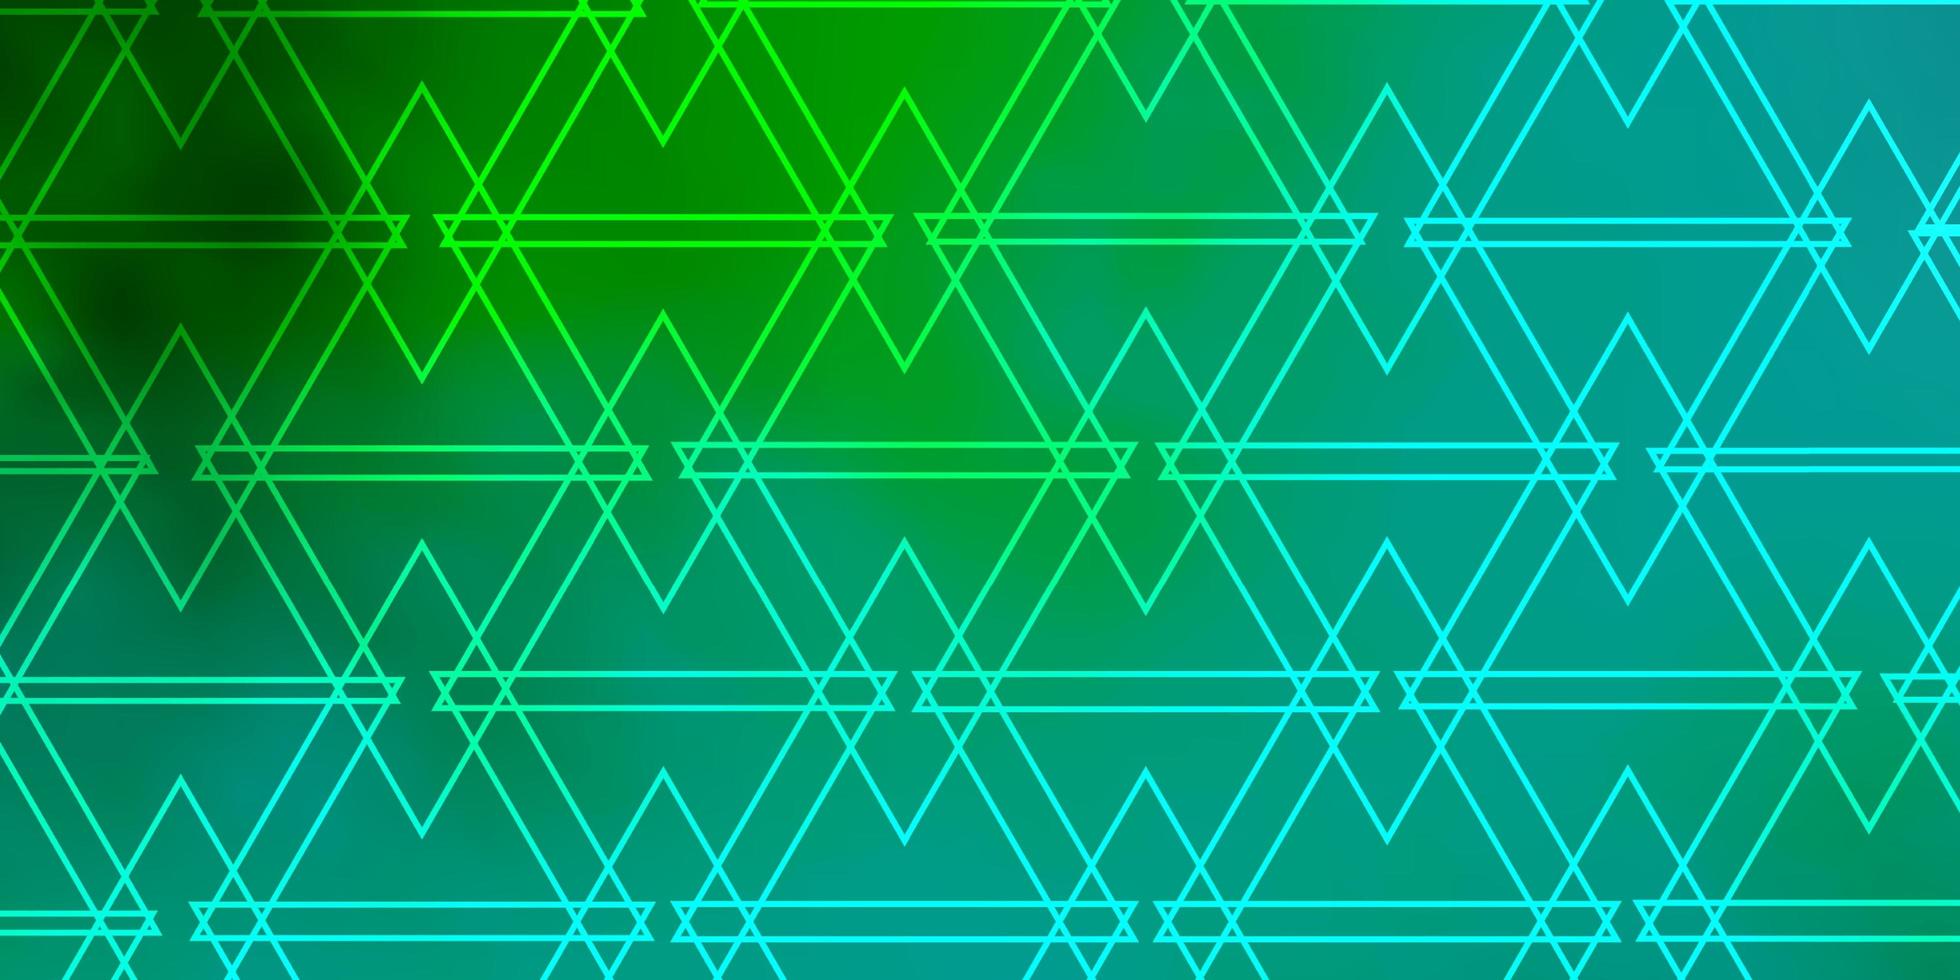 Light Green layout with lines, triangles. vector